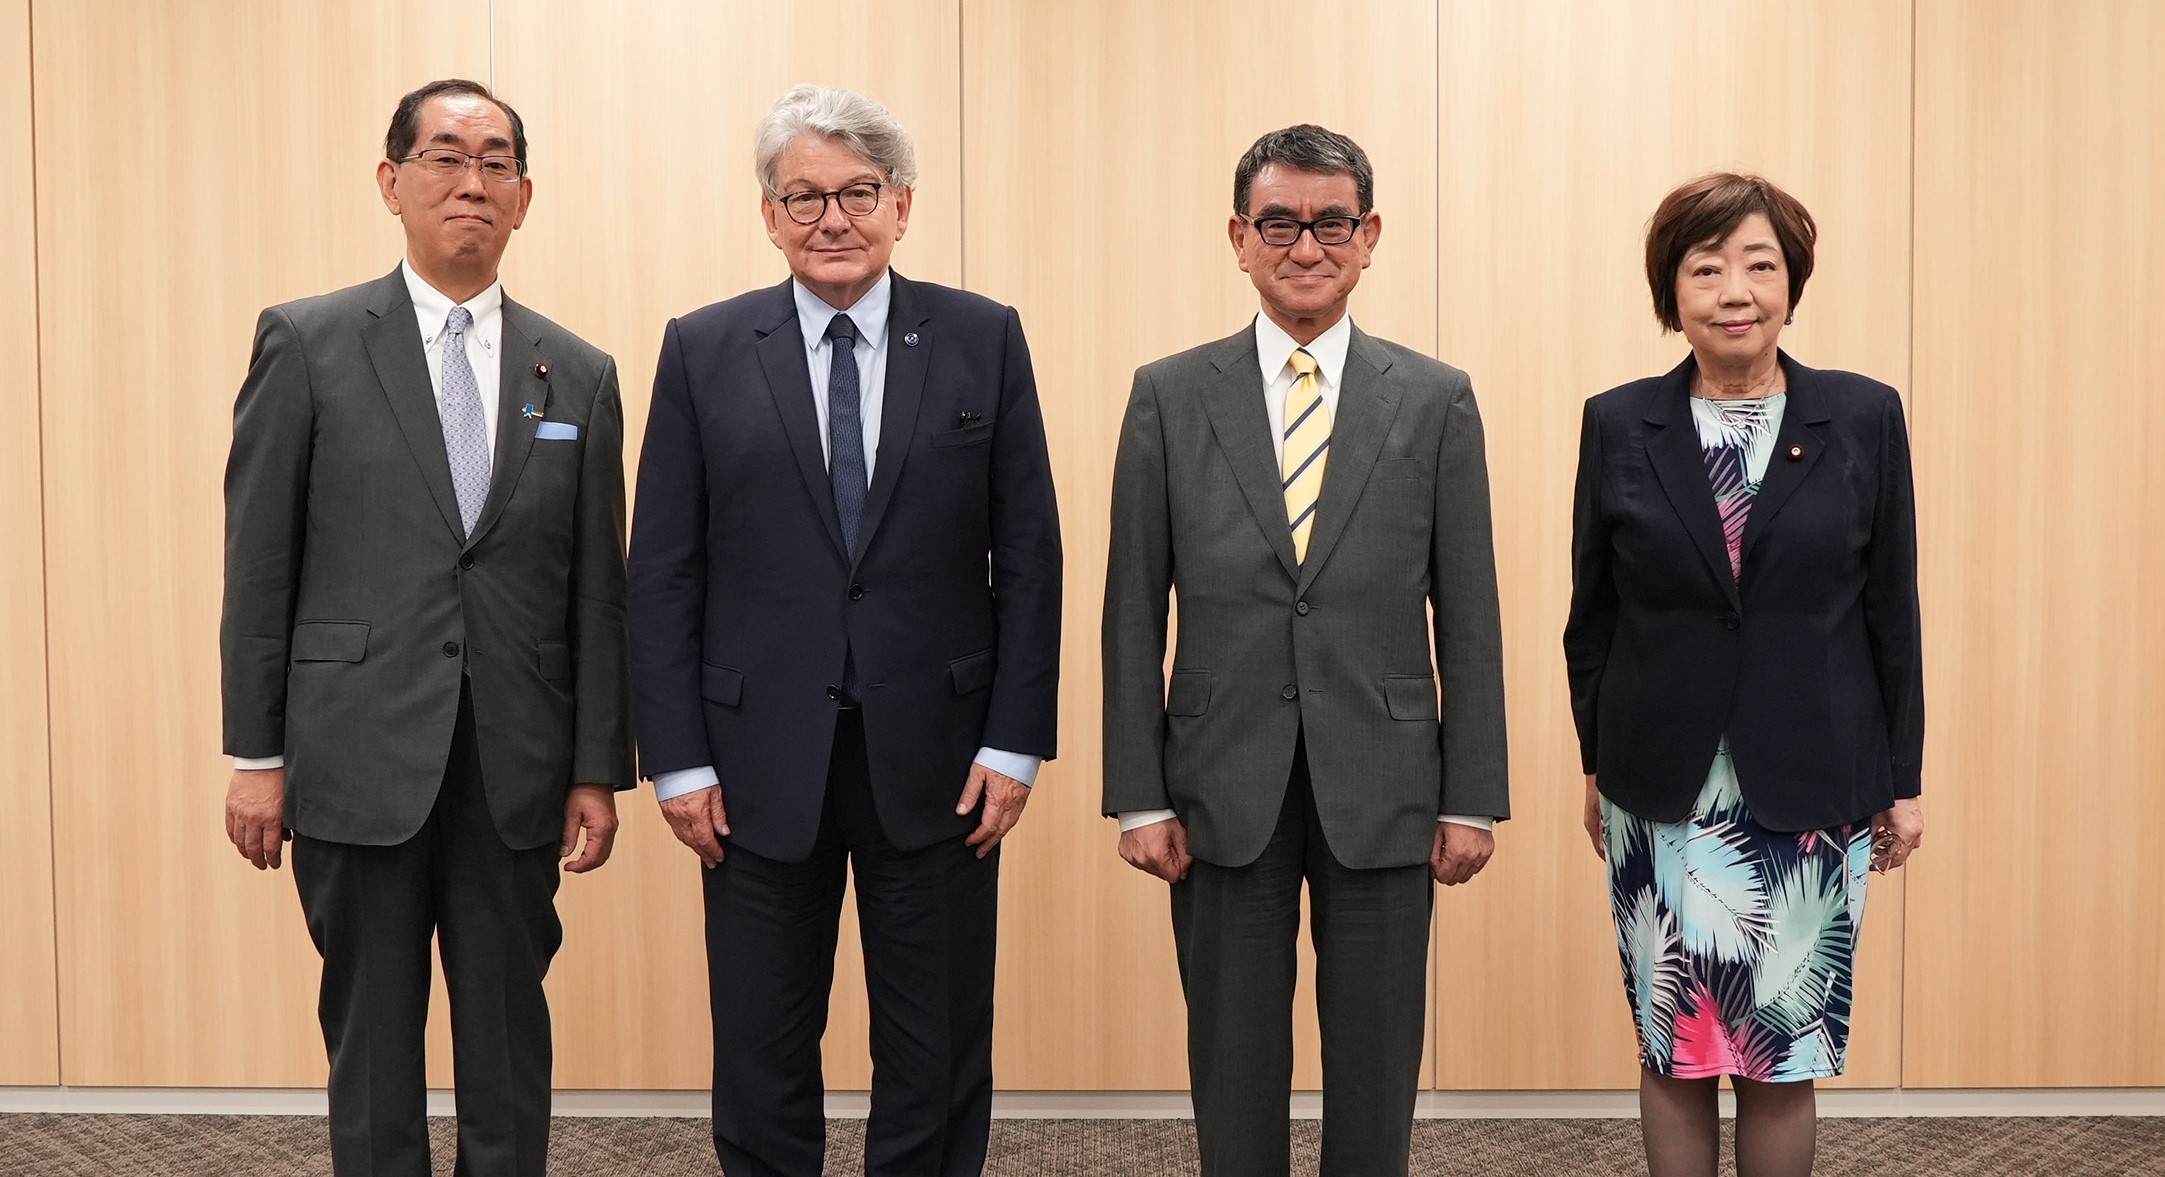 Photo of  the 3 participating ministers from Japan (Ministry of Internal Affairs and Communications, Ministry of Economy, Trade and Industry, and Digital Agency) and Mr. Breton.